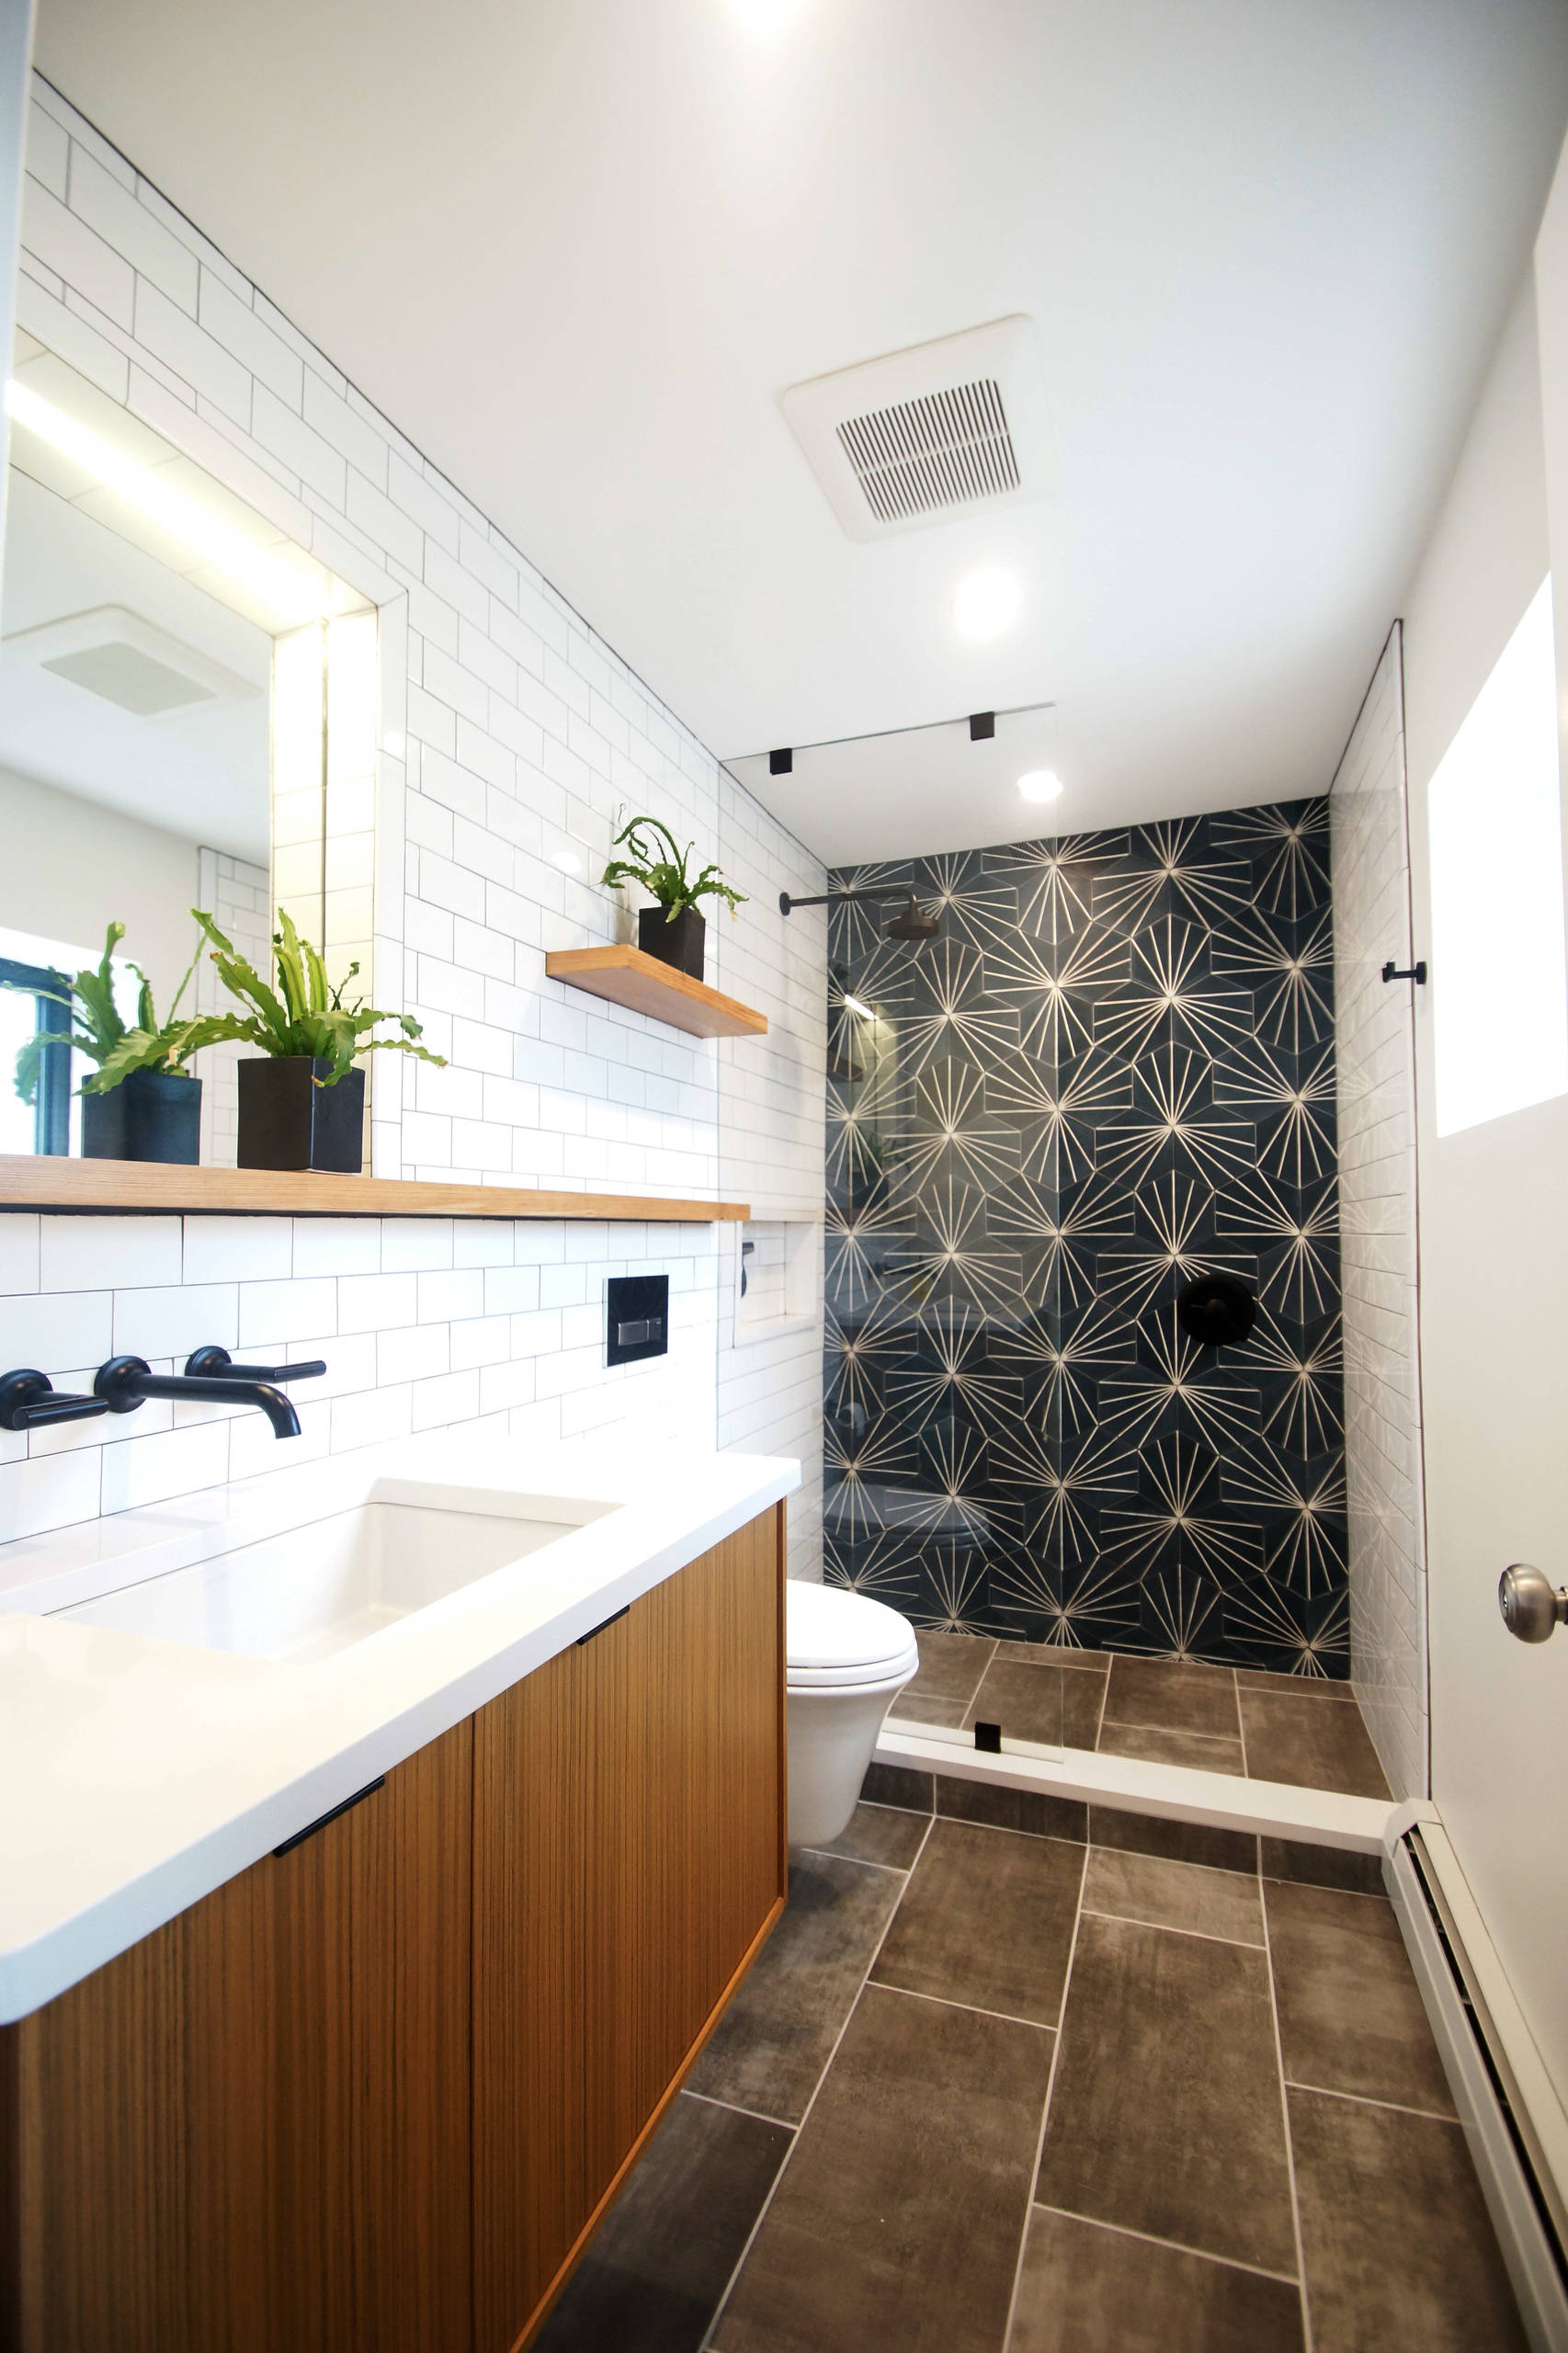 55 Bathroom Remodeling Ideas to Brighten Small Spaces, Modern